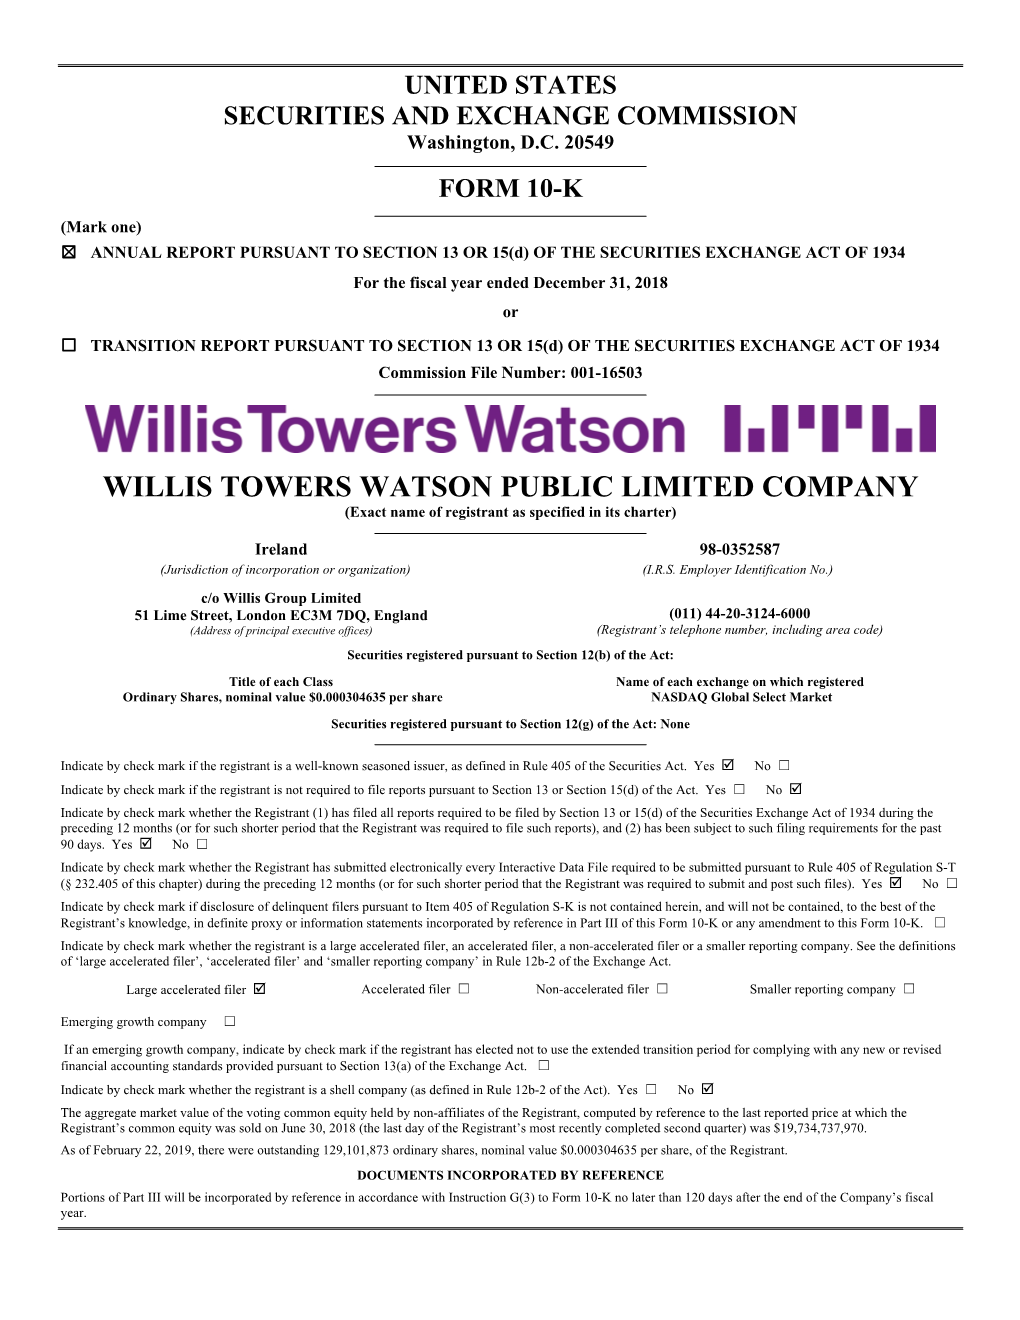 WILLIS TOWERS WATSON PUBLIC LIMITED COMPANY (Exact Name of Registrant As Specified in Its Charter)